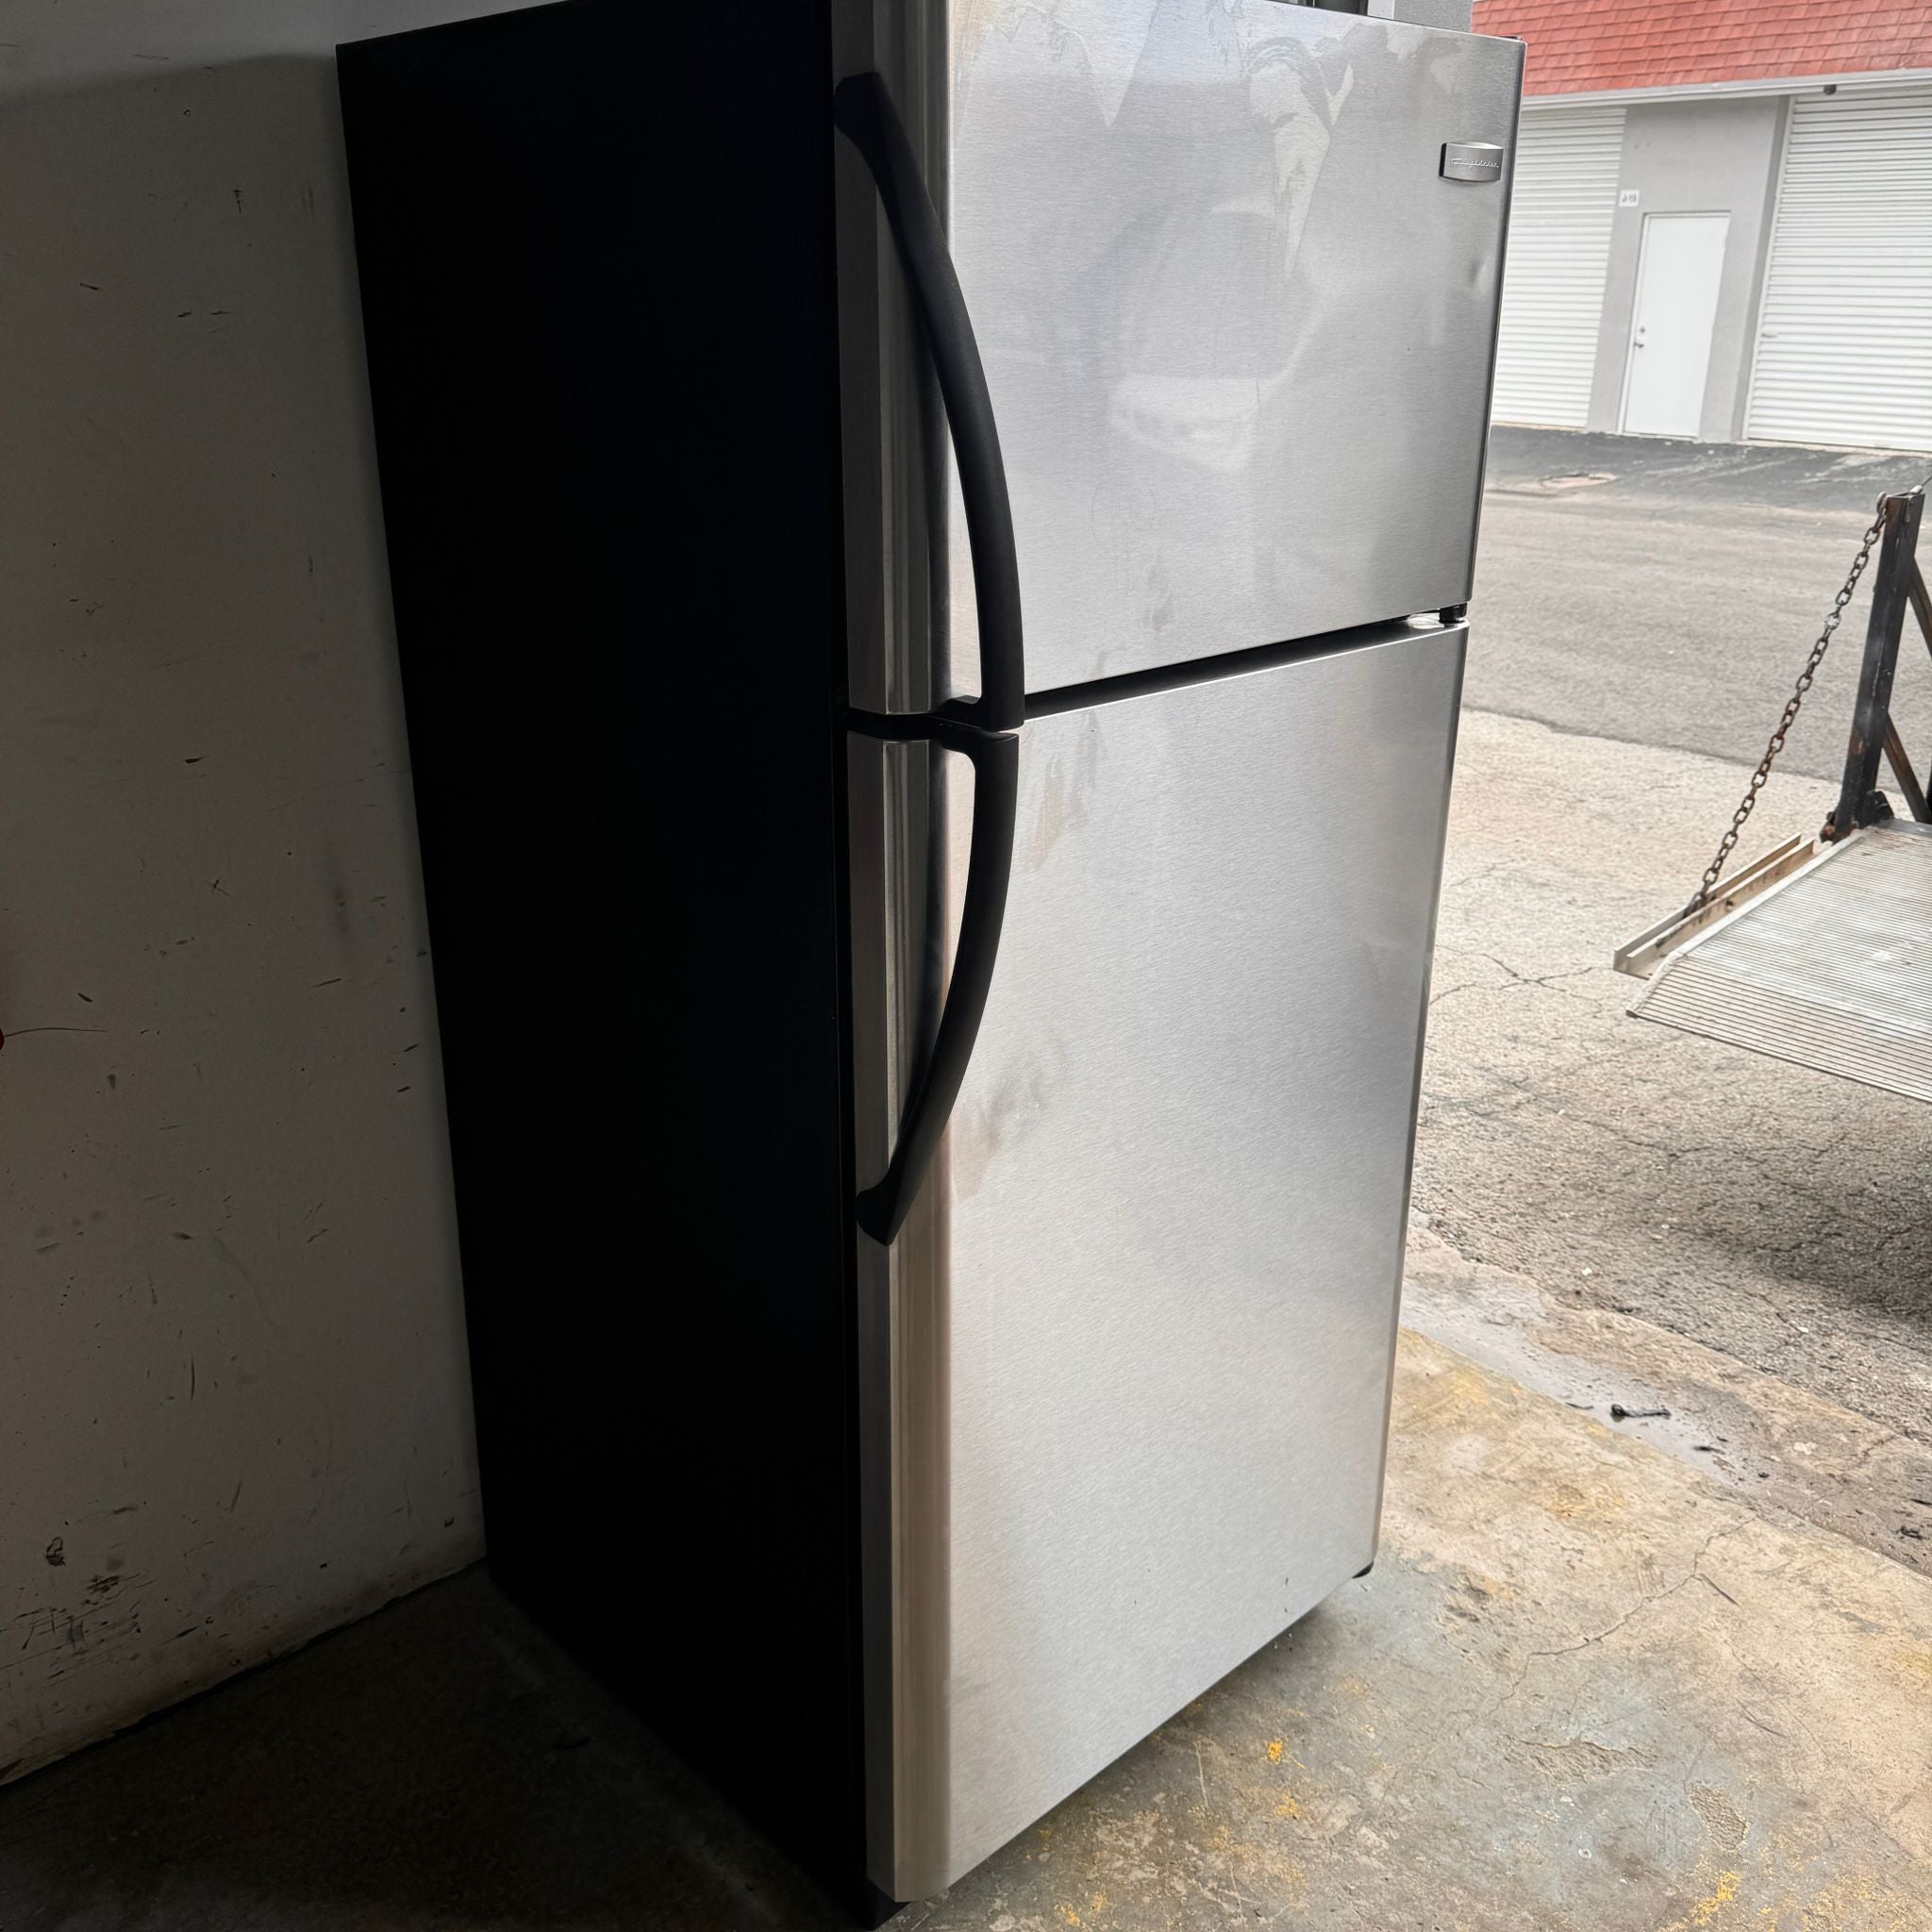 Frigidaire Stainless Steel Top and Bottom Refrigerator